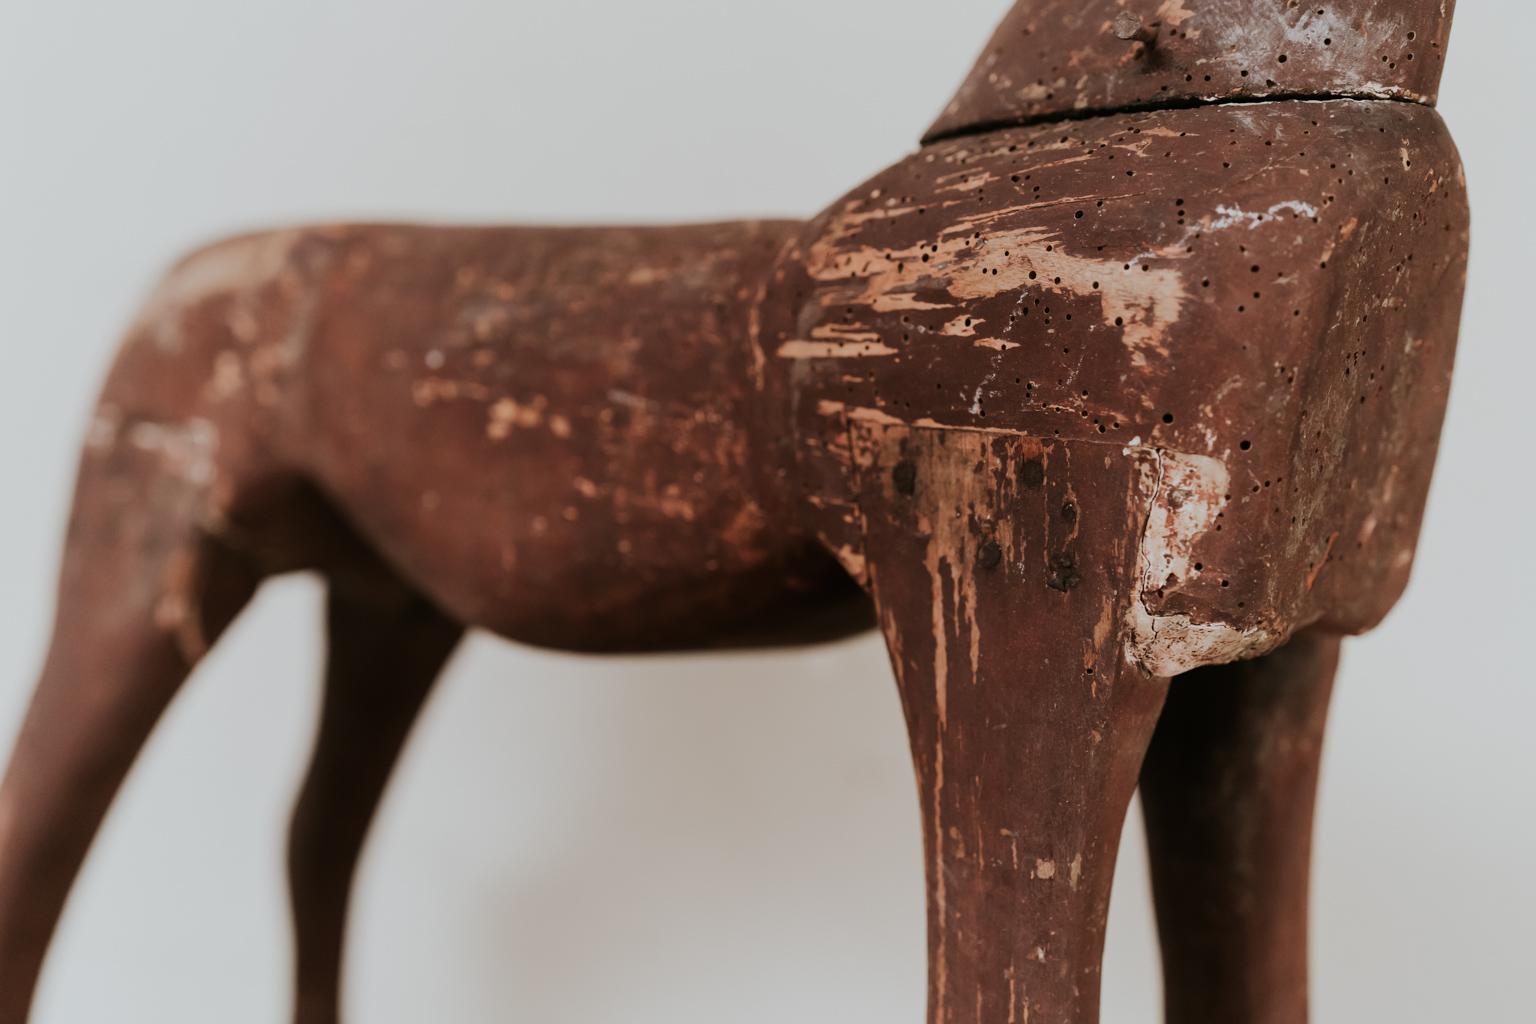 Found this naieve sculpted wooden horse in Sweden, can date it circa 1860-1880,
decorative and genuine piece.